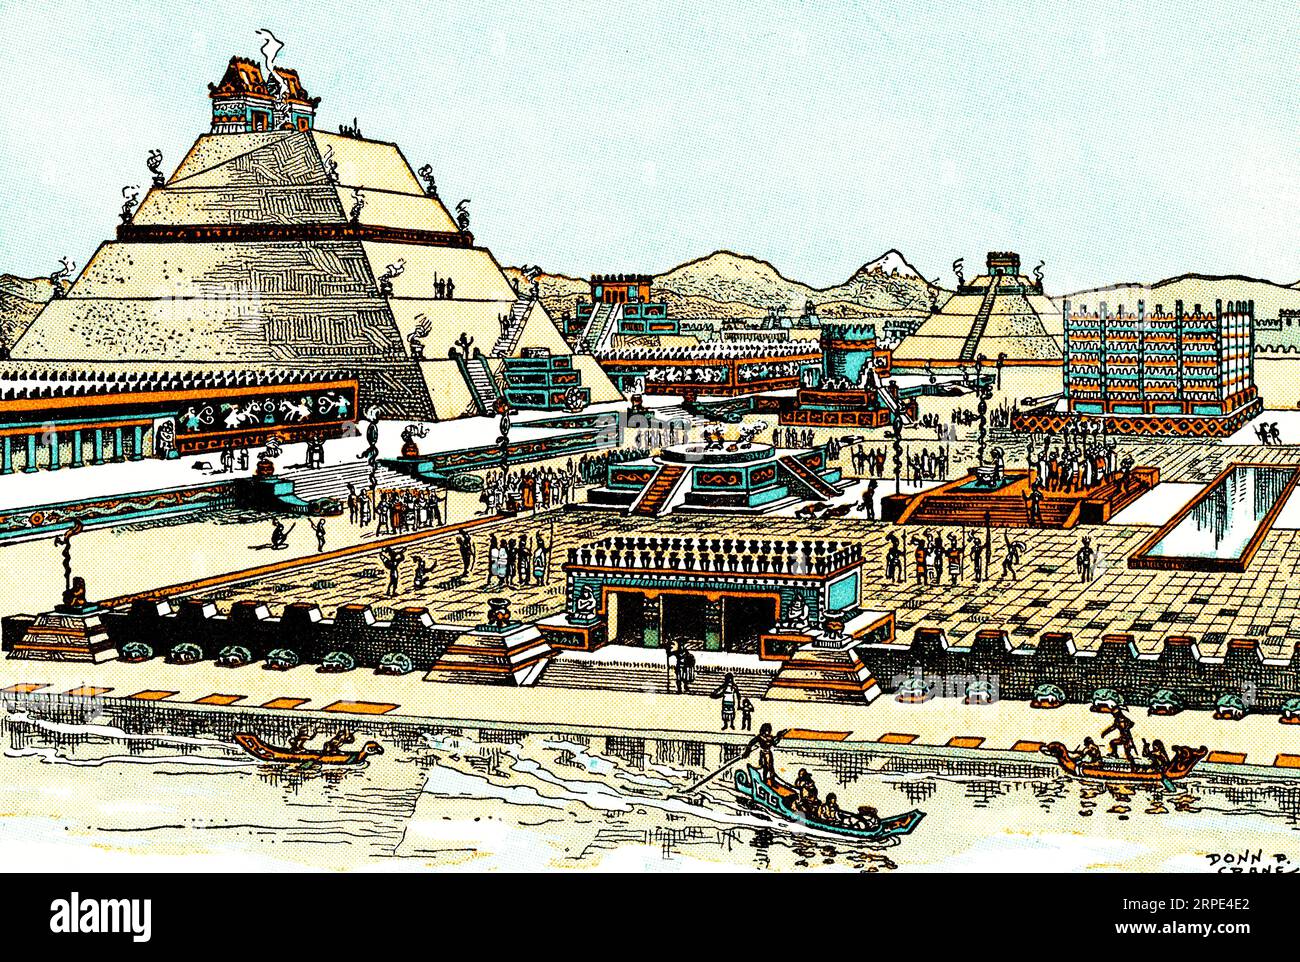 Reconstruction of the ceremonial center of Tenochtitlan, including the Templo Mayor. By Donn Philip Crane (1878-1944). Tenochtitlan, also known as Mexico-Tenochtitlan, was a large Mexican altepetl in what is now the historic center of Mexico City. The city was built on an island in what was then Lake Texcoco in the Valley of Mexico. The city was the capital of the Aztec Empire in the 15th century until it was captured by the Spanish in 1521. Stock Photo